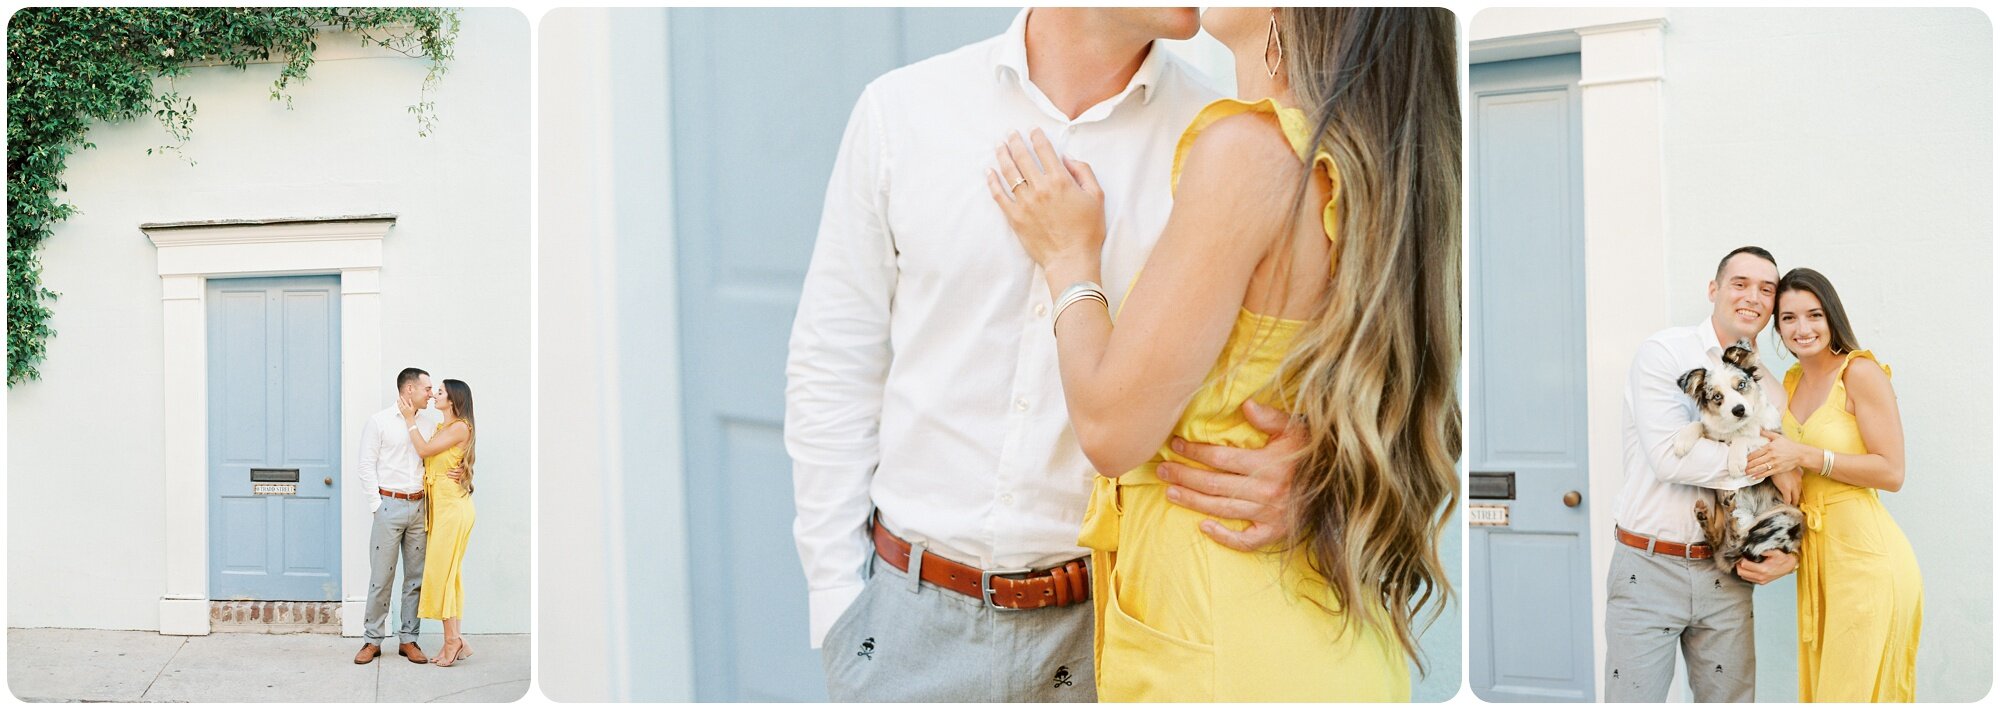 rainbow_row_yellow_blue_outfit_battery_downtown_charleston_engagement_puppy_outdoor_wedding_photographers_husband_wife_team_kailee_tim_kailee_dimeglio_photography_charleston_traveling_photographers_0020.jpg